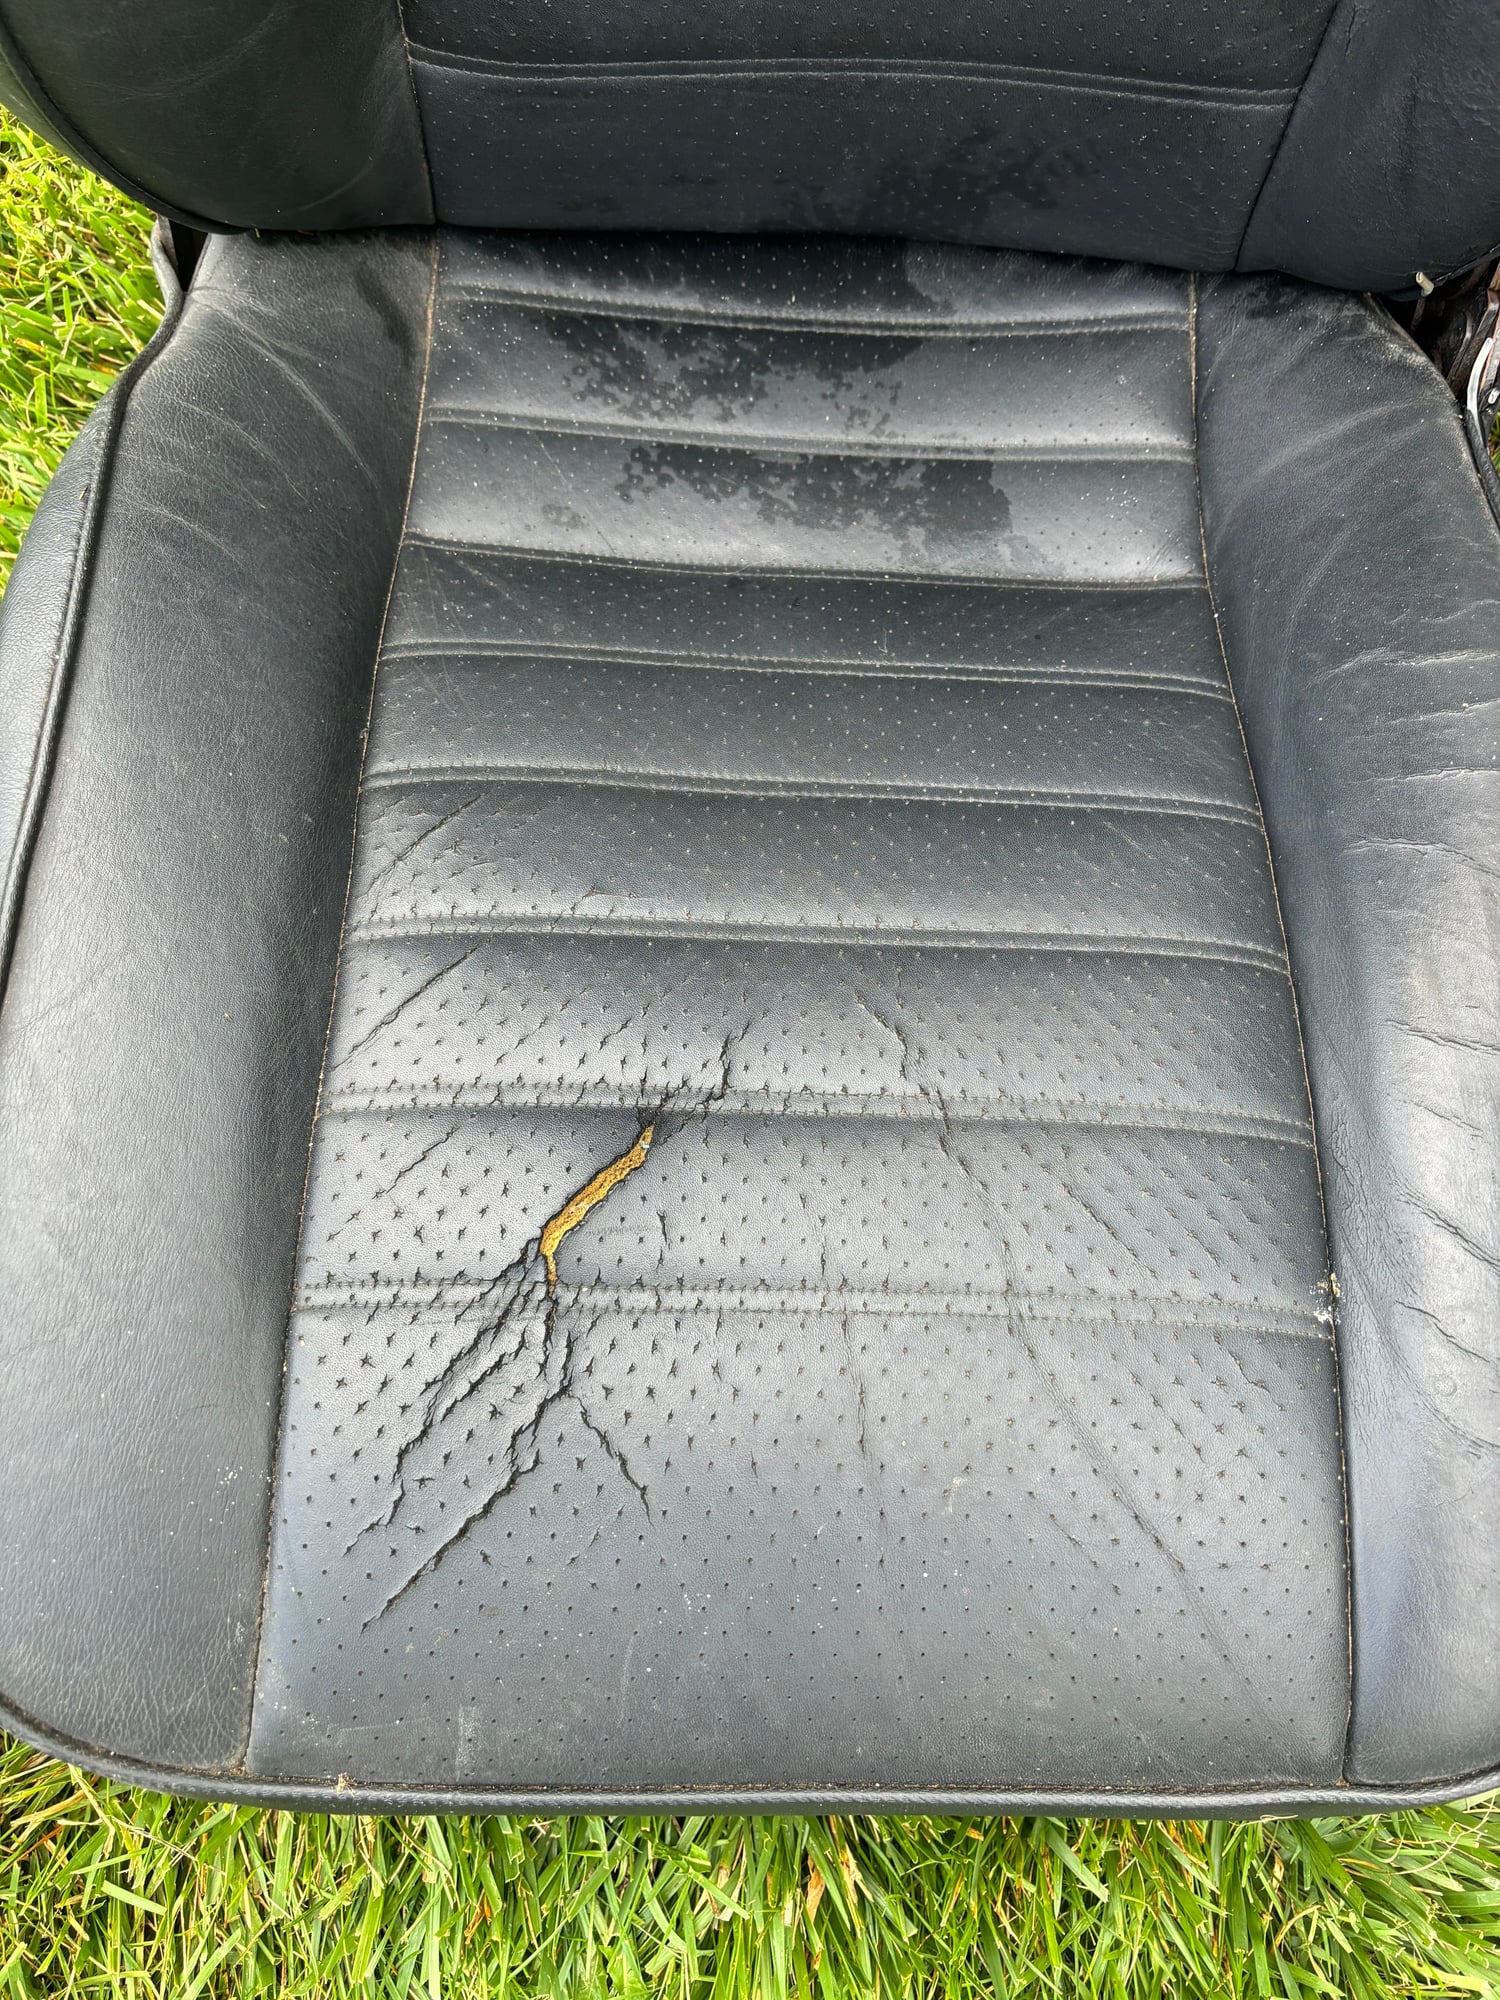 Interior/Upholstery - Porsche 911 G-Series Front Seats - Used - 0  All Models - West Chester, PA 19382, United States